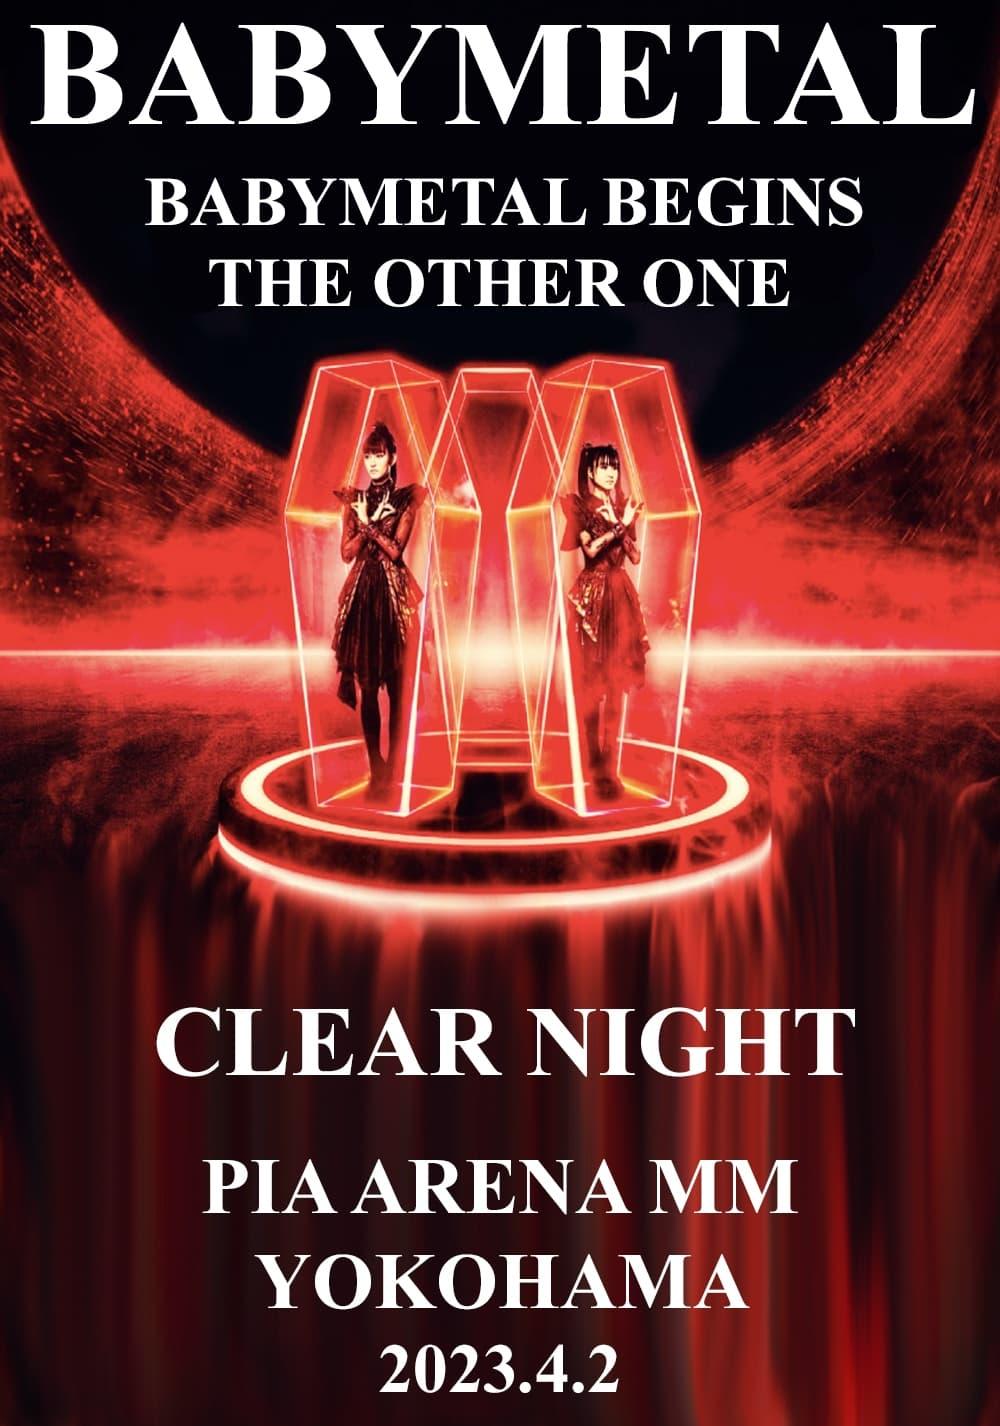 BABYMETAL BEGINS - THE OTHER ONE - "CLEAR NIGHT" poster